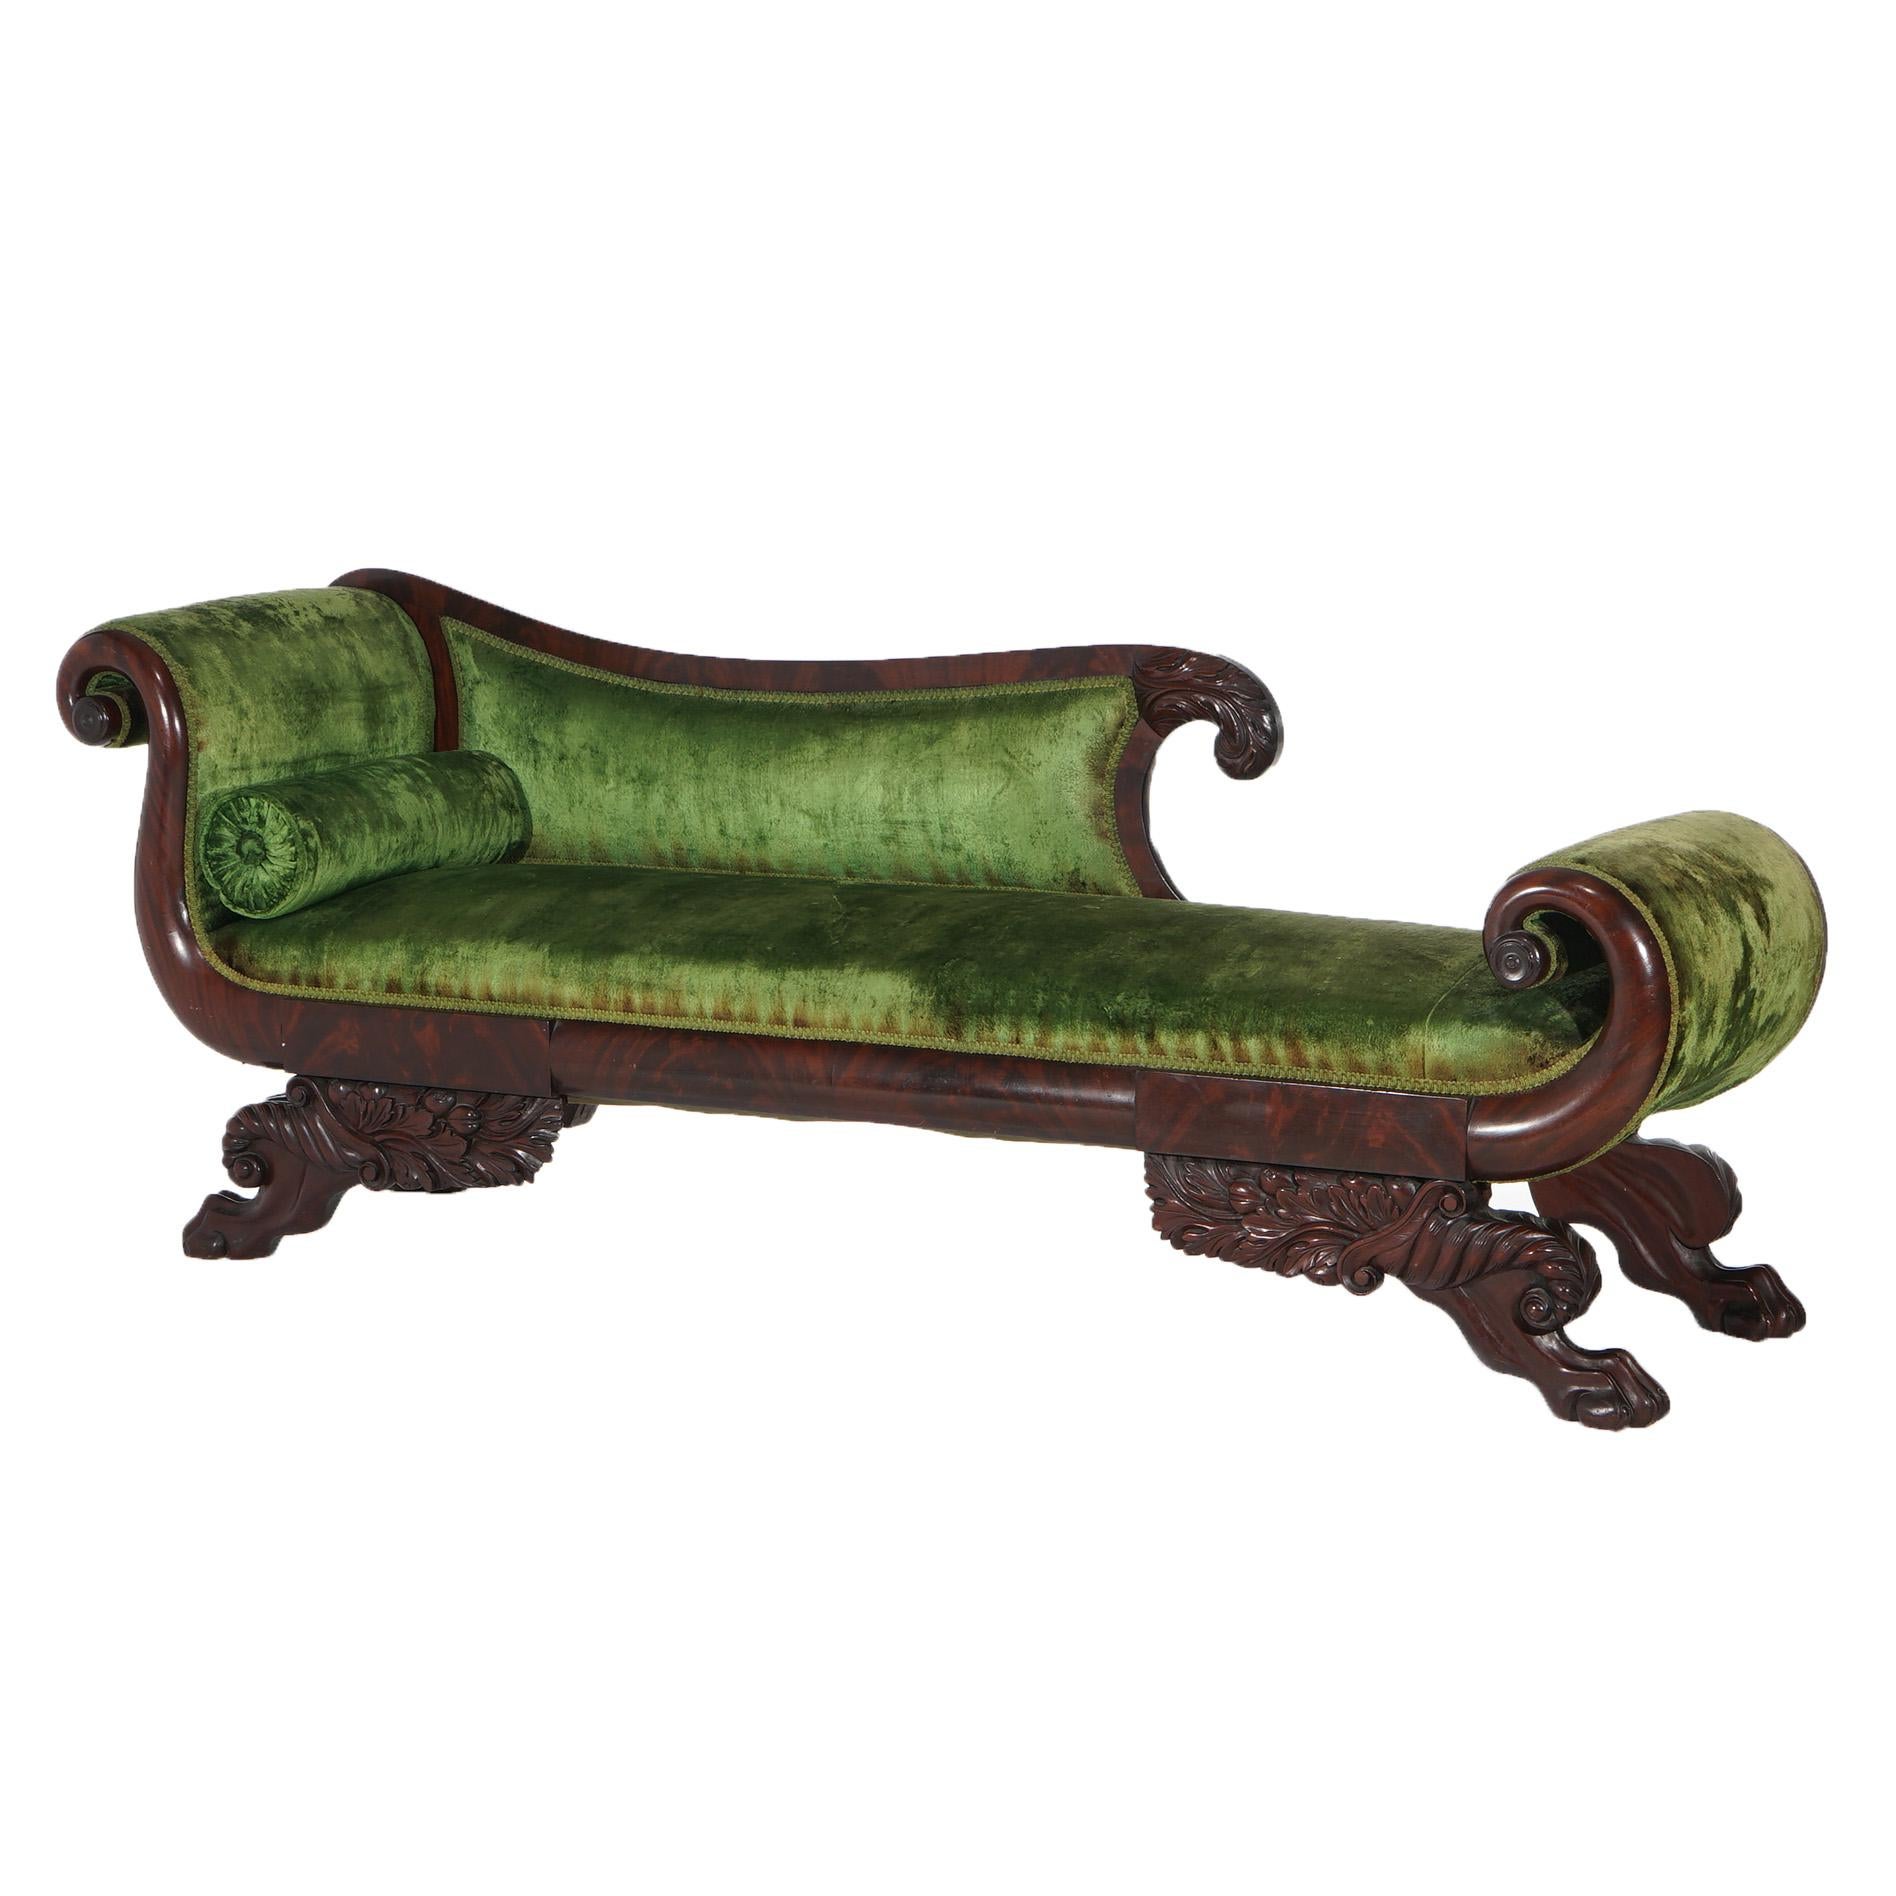 ***Ask About Reduced In-House Delivery Rates - Reliable Professional Service & Fully Insured***
Antique American Empire Neoclassical Greco Recamier Sofa with Scroll Form Flame Mahogany Frame, Green Velvet Upholstery and Carved Paw Feet